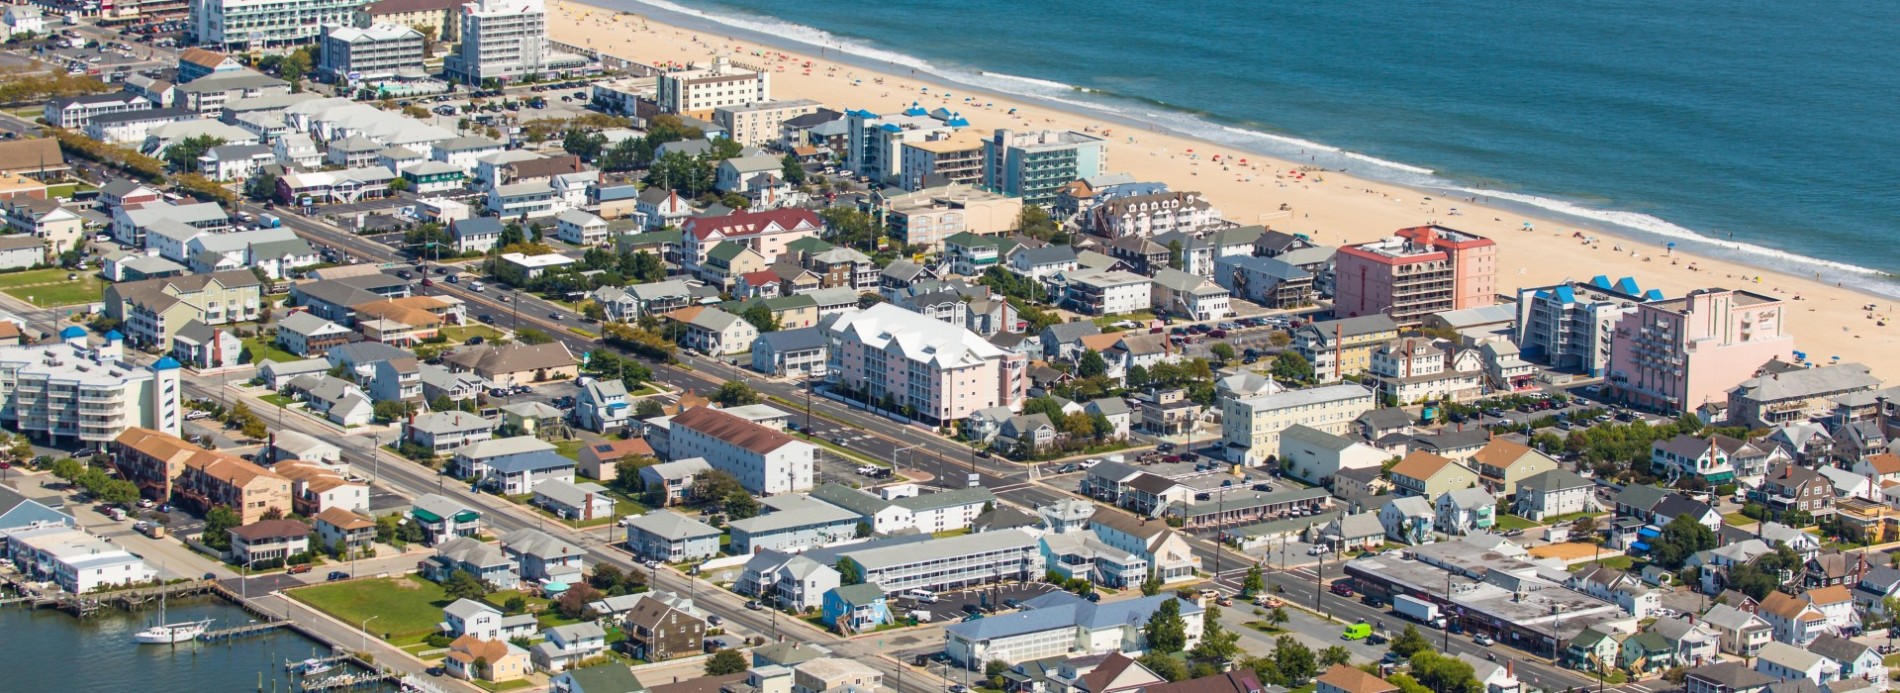 Enjoy these Events on your Summer Vacation in Ocean City, MD Feature Image